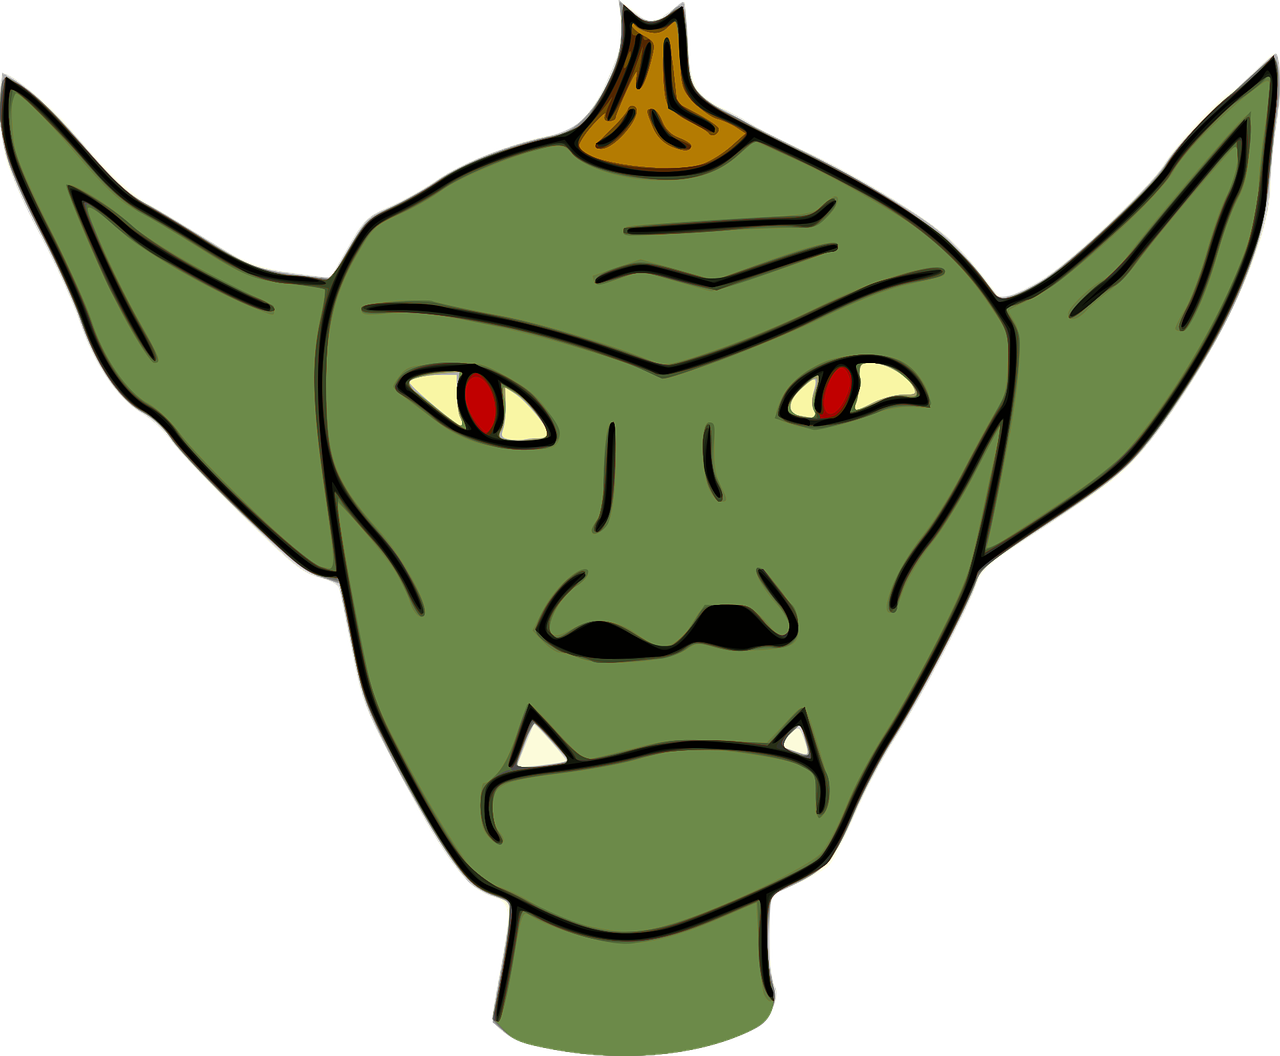 game asset call non-human beings simple goblin head free photo